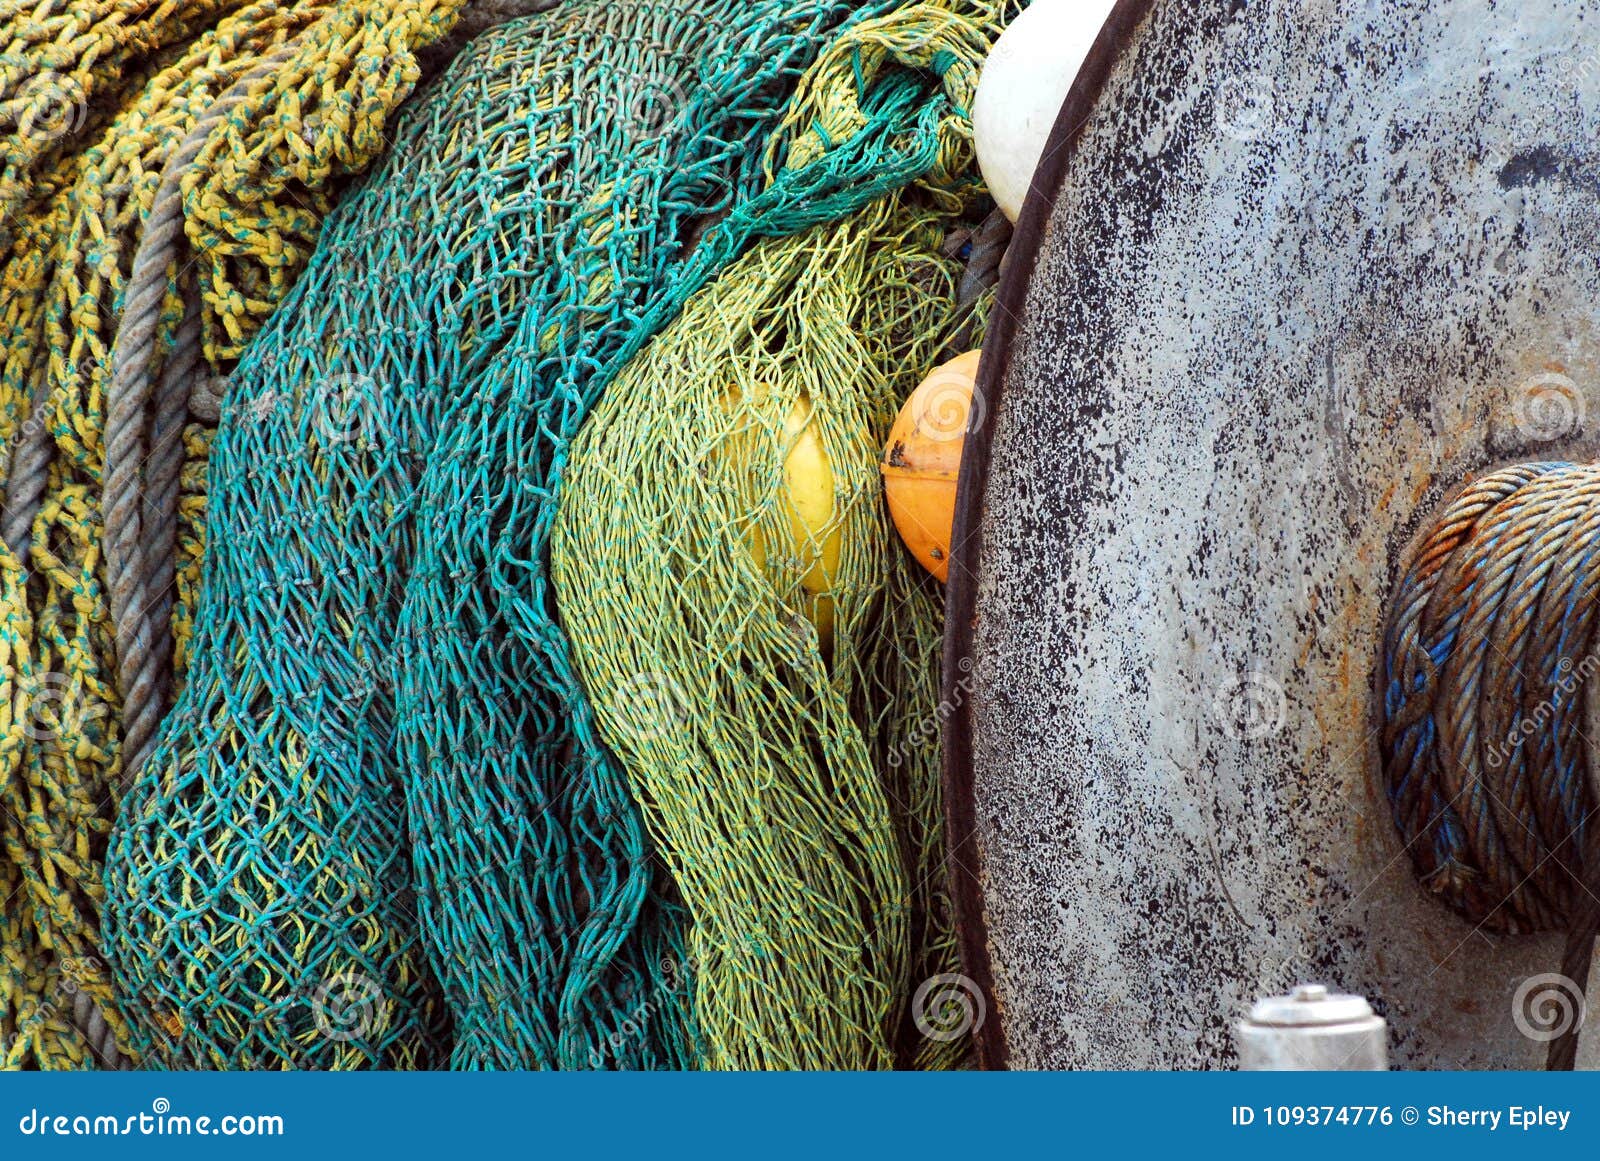 1,043 Colorful Fishing Nets Ocean Background Stock Photos - Free